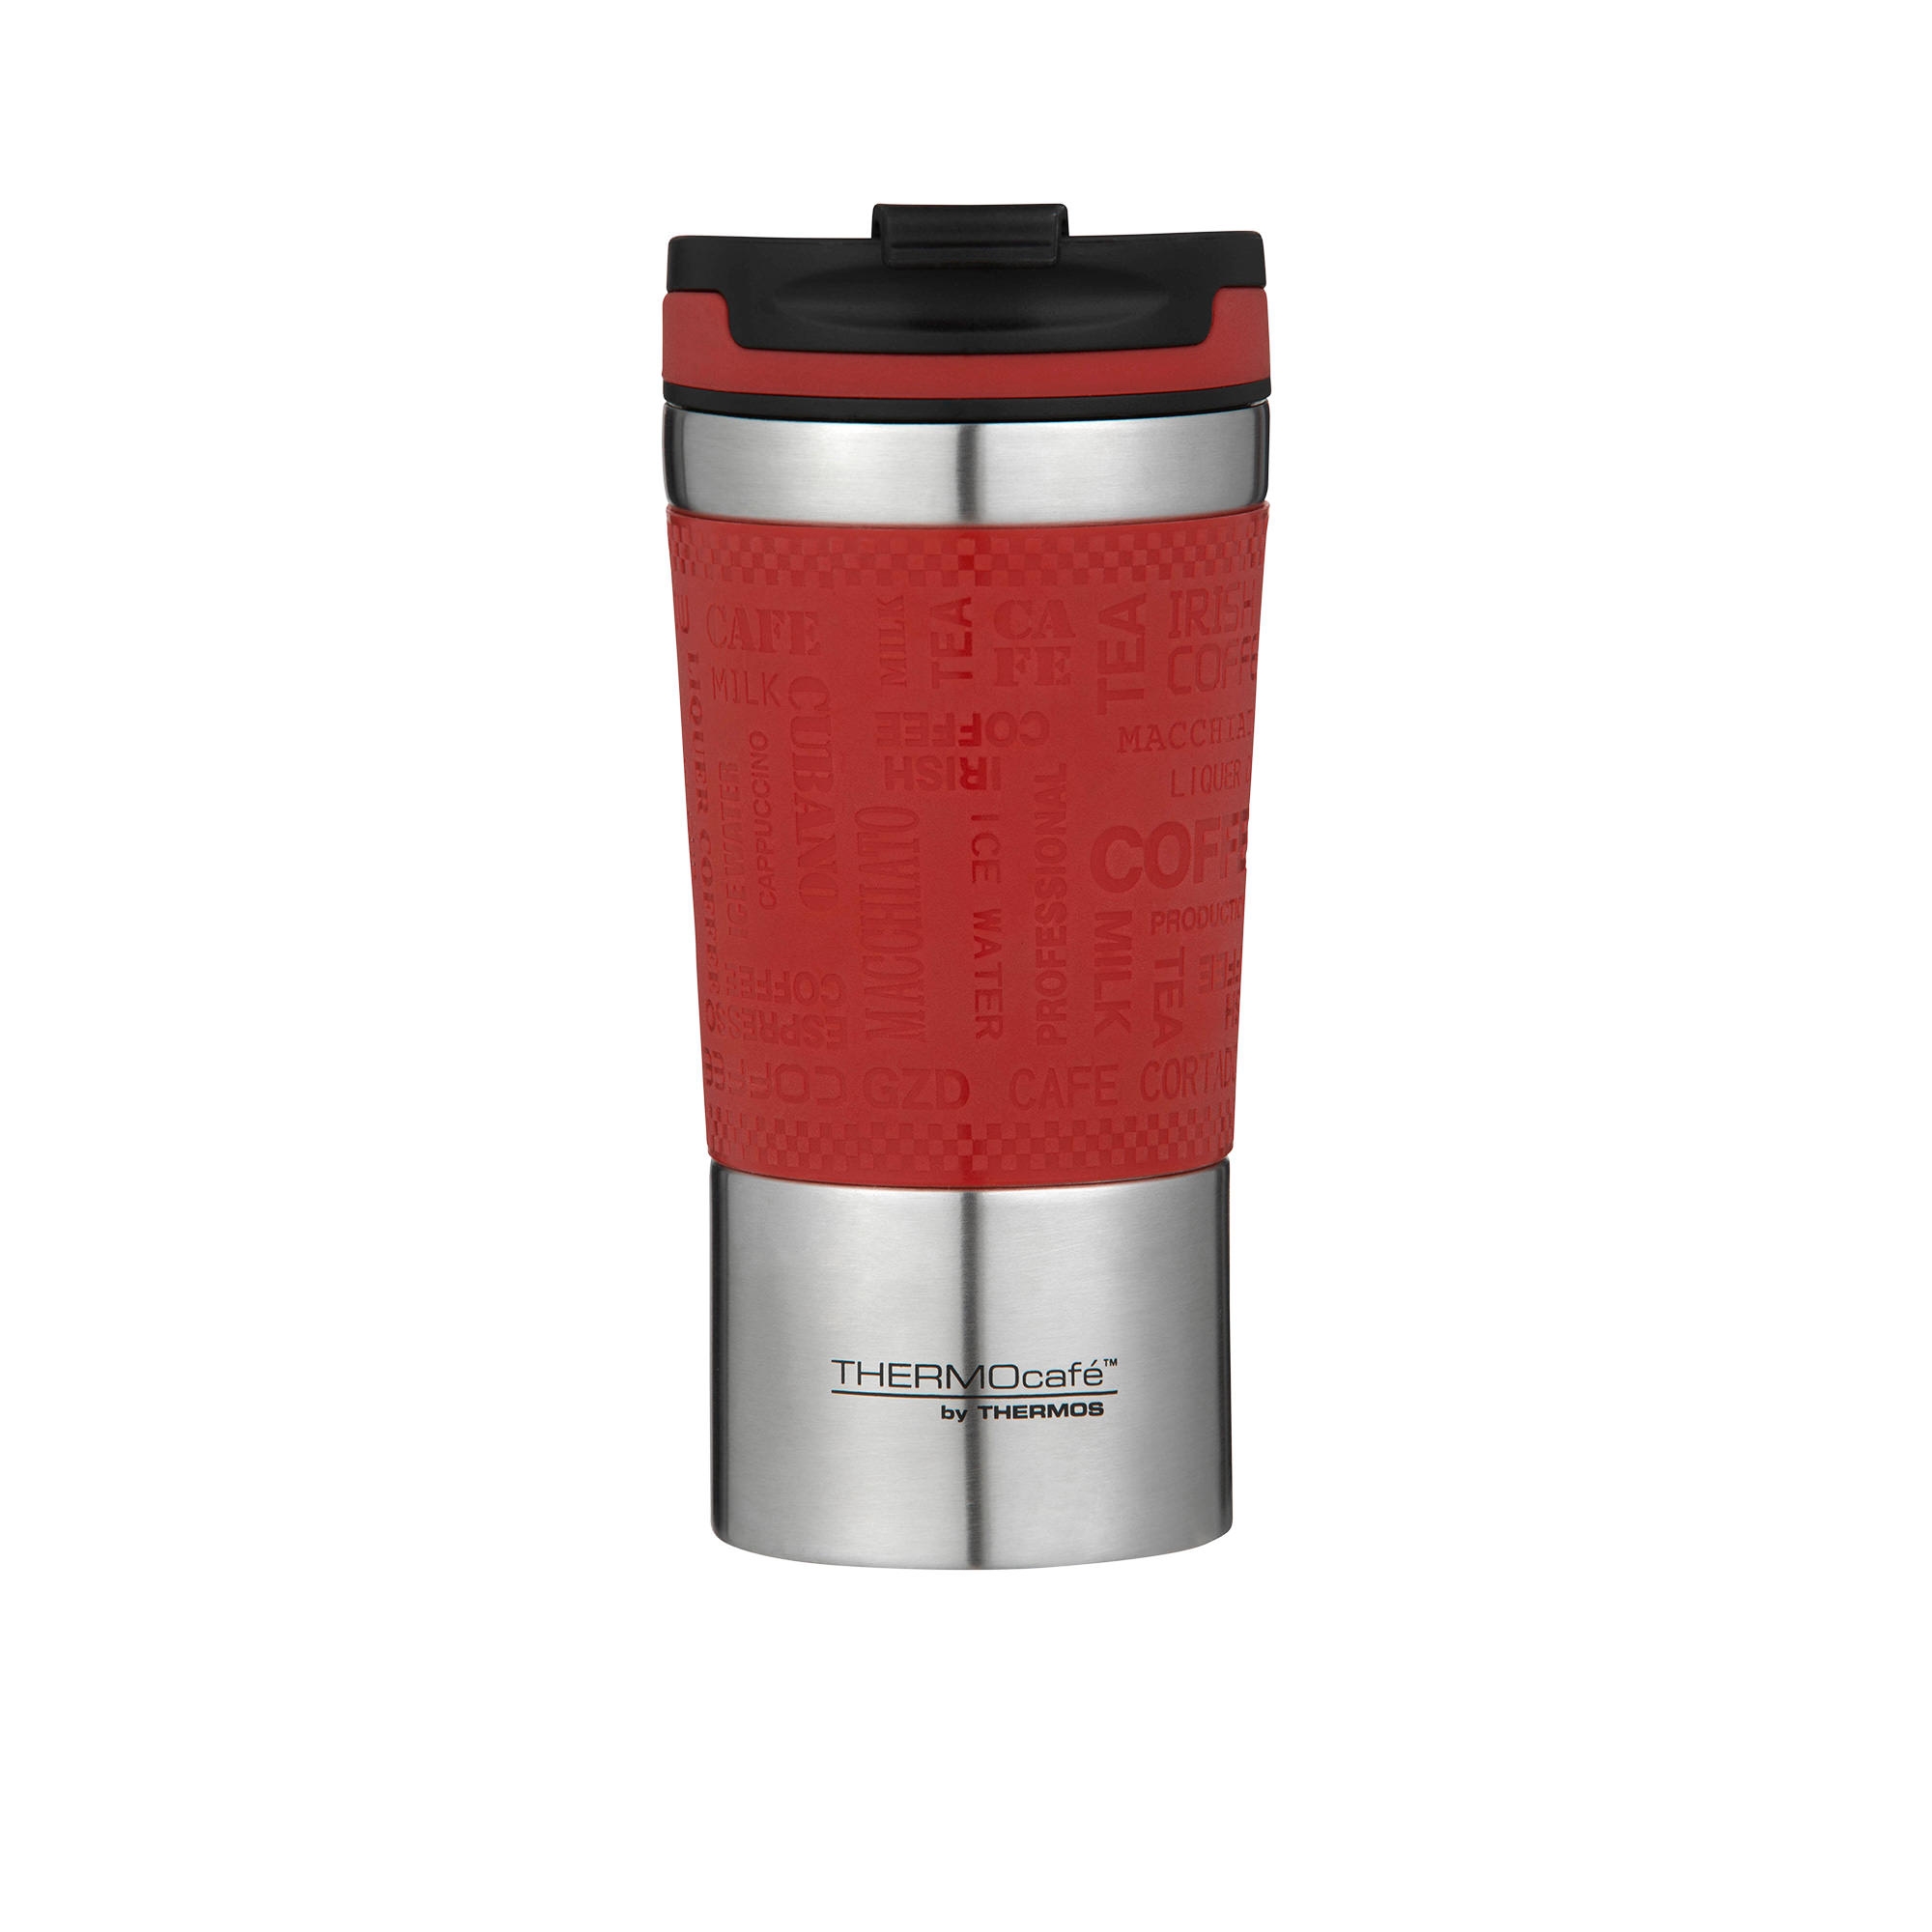 Thermos THERMOcafe Insulated Travel Cup 350ml Dark Red Image 1